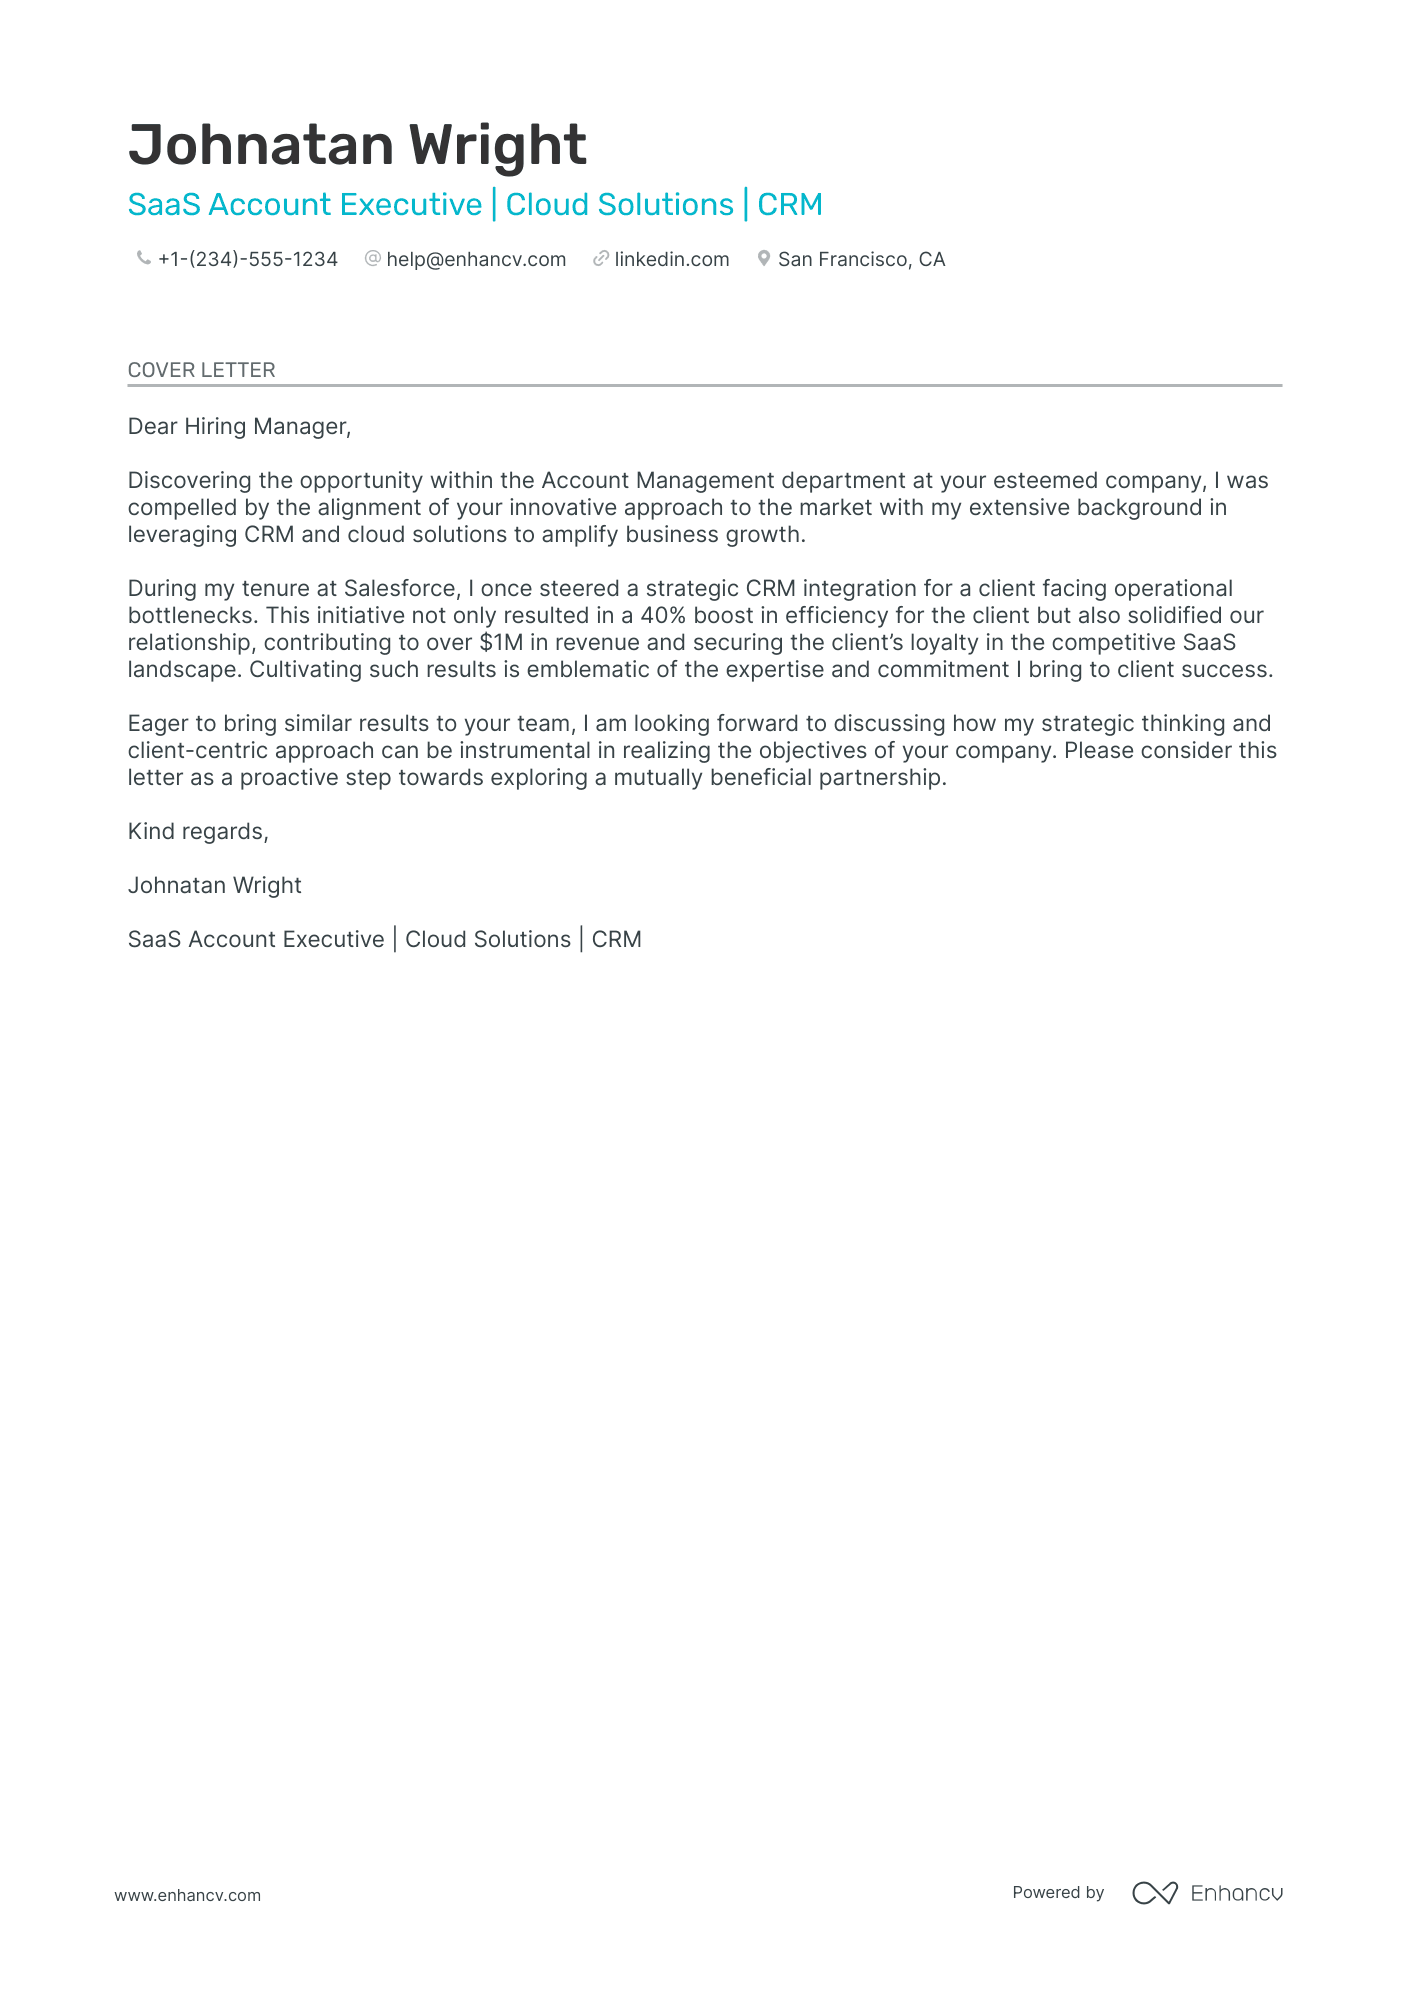 SaaS Account Executive cover letter